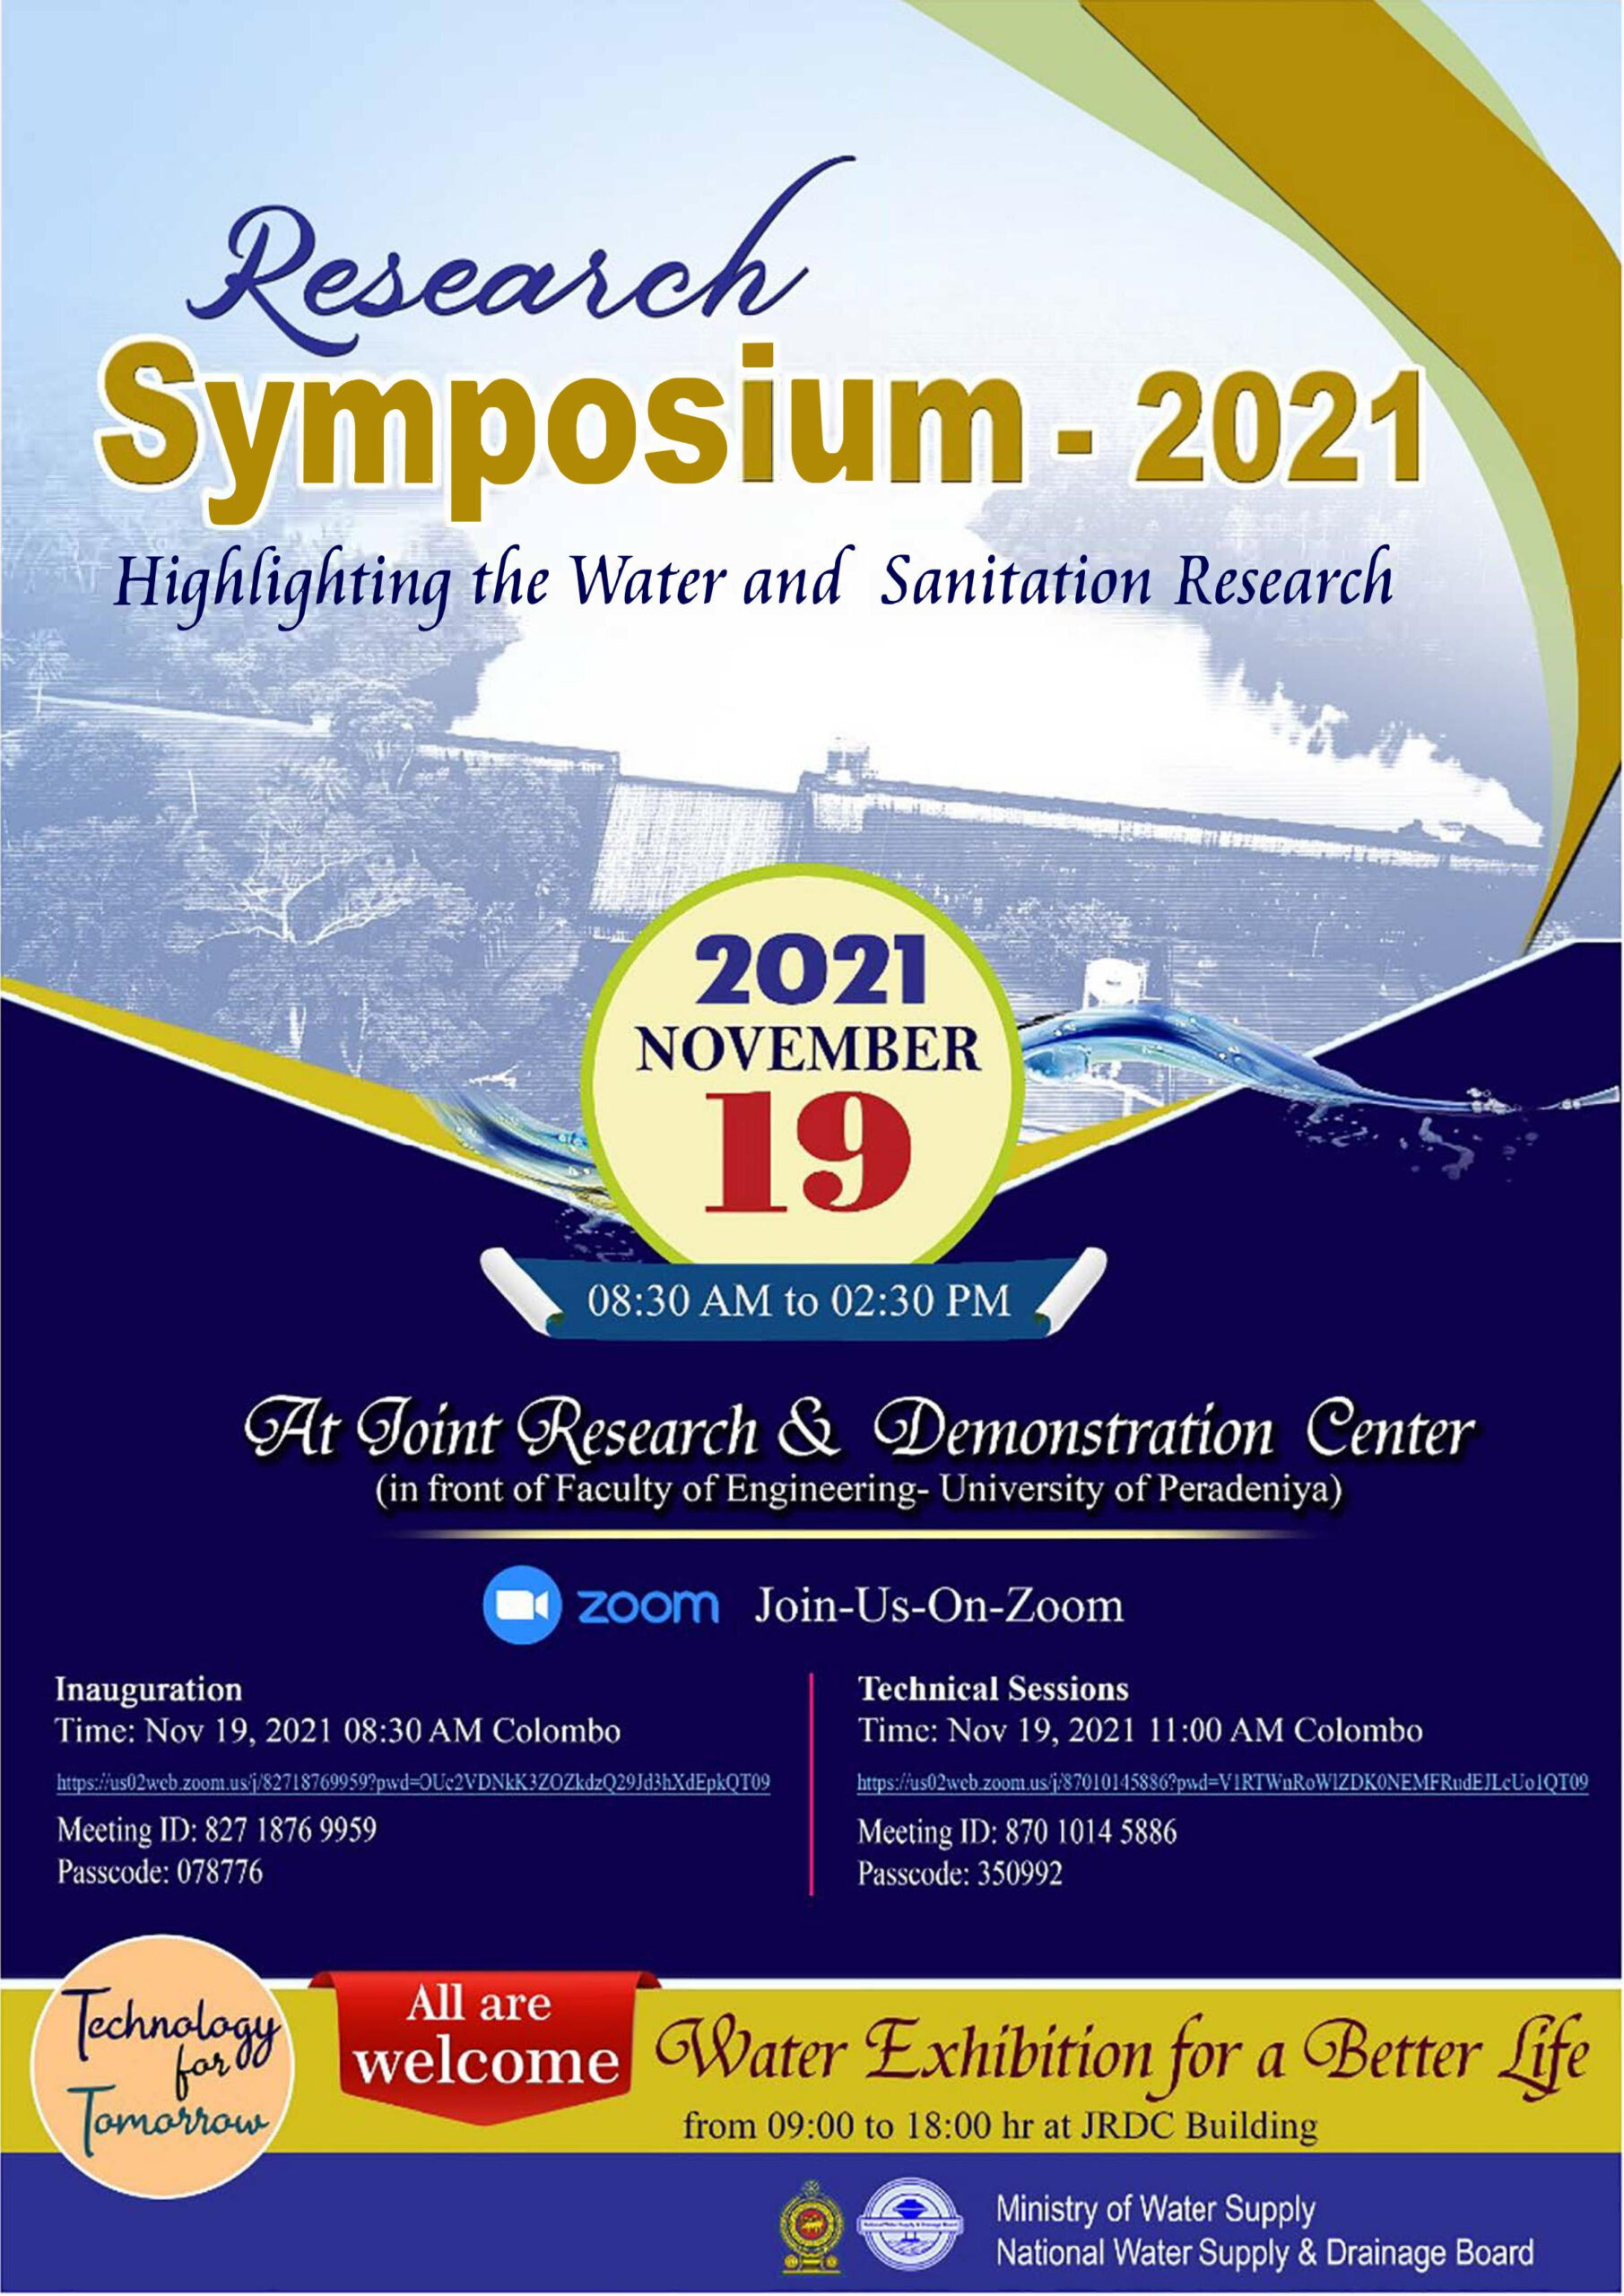 Highlighting the Water and Sanitation Research” – Research Symposium 2021